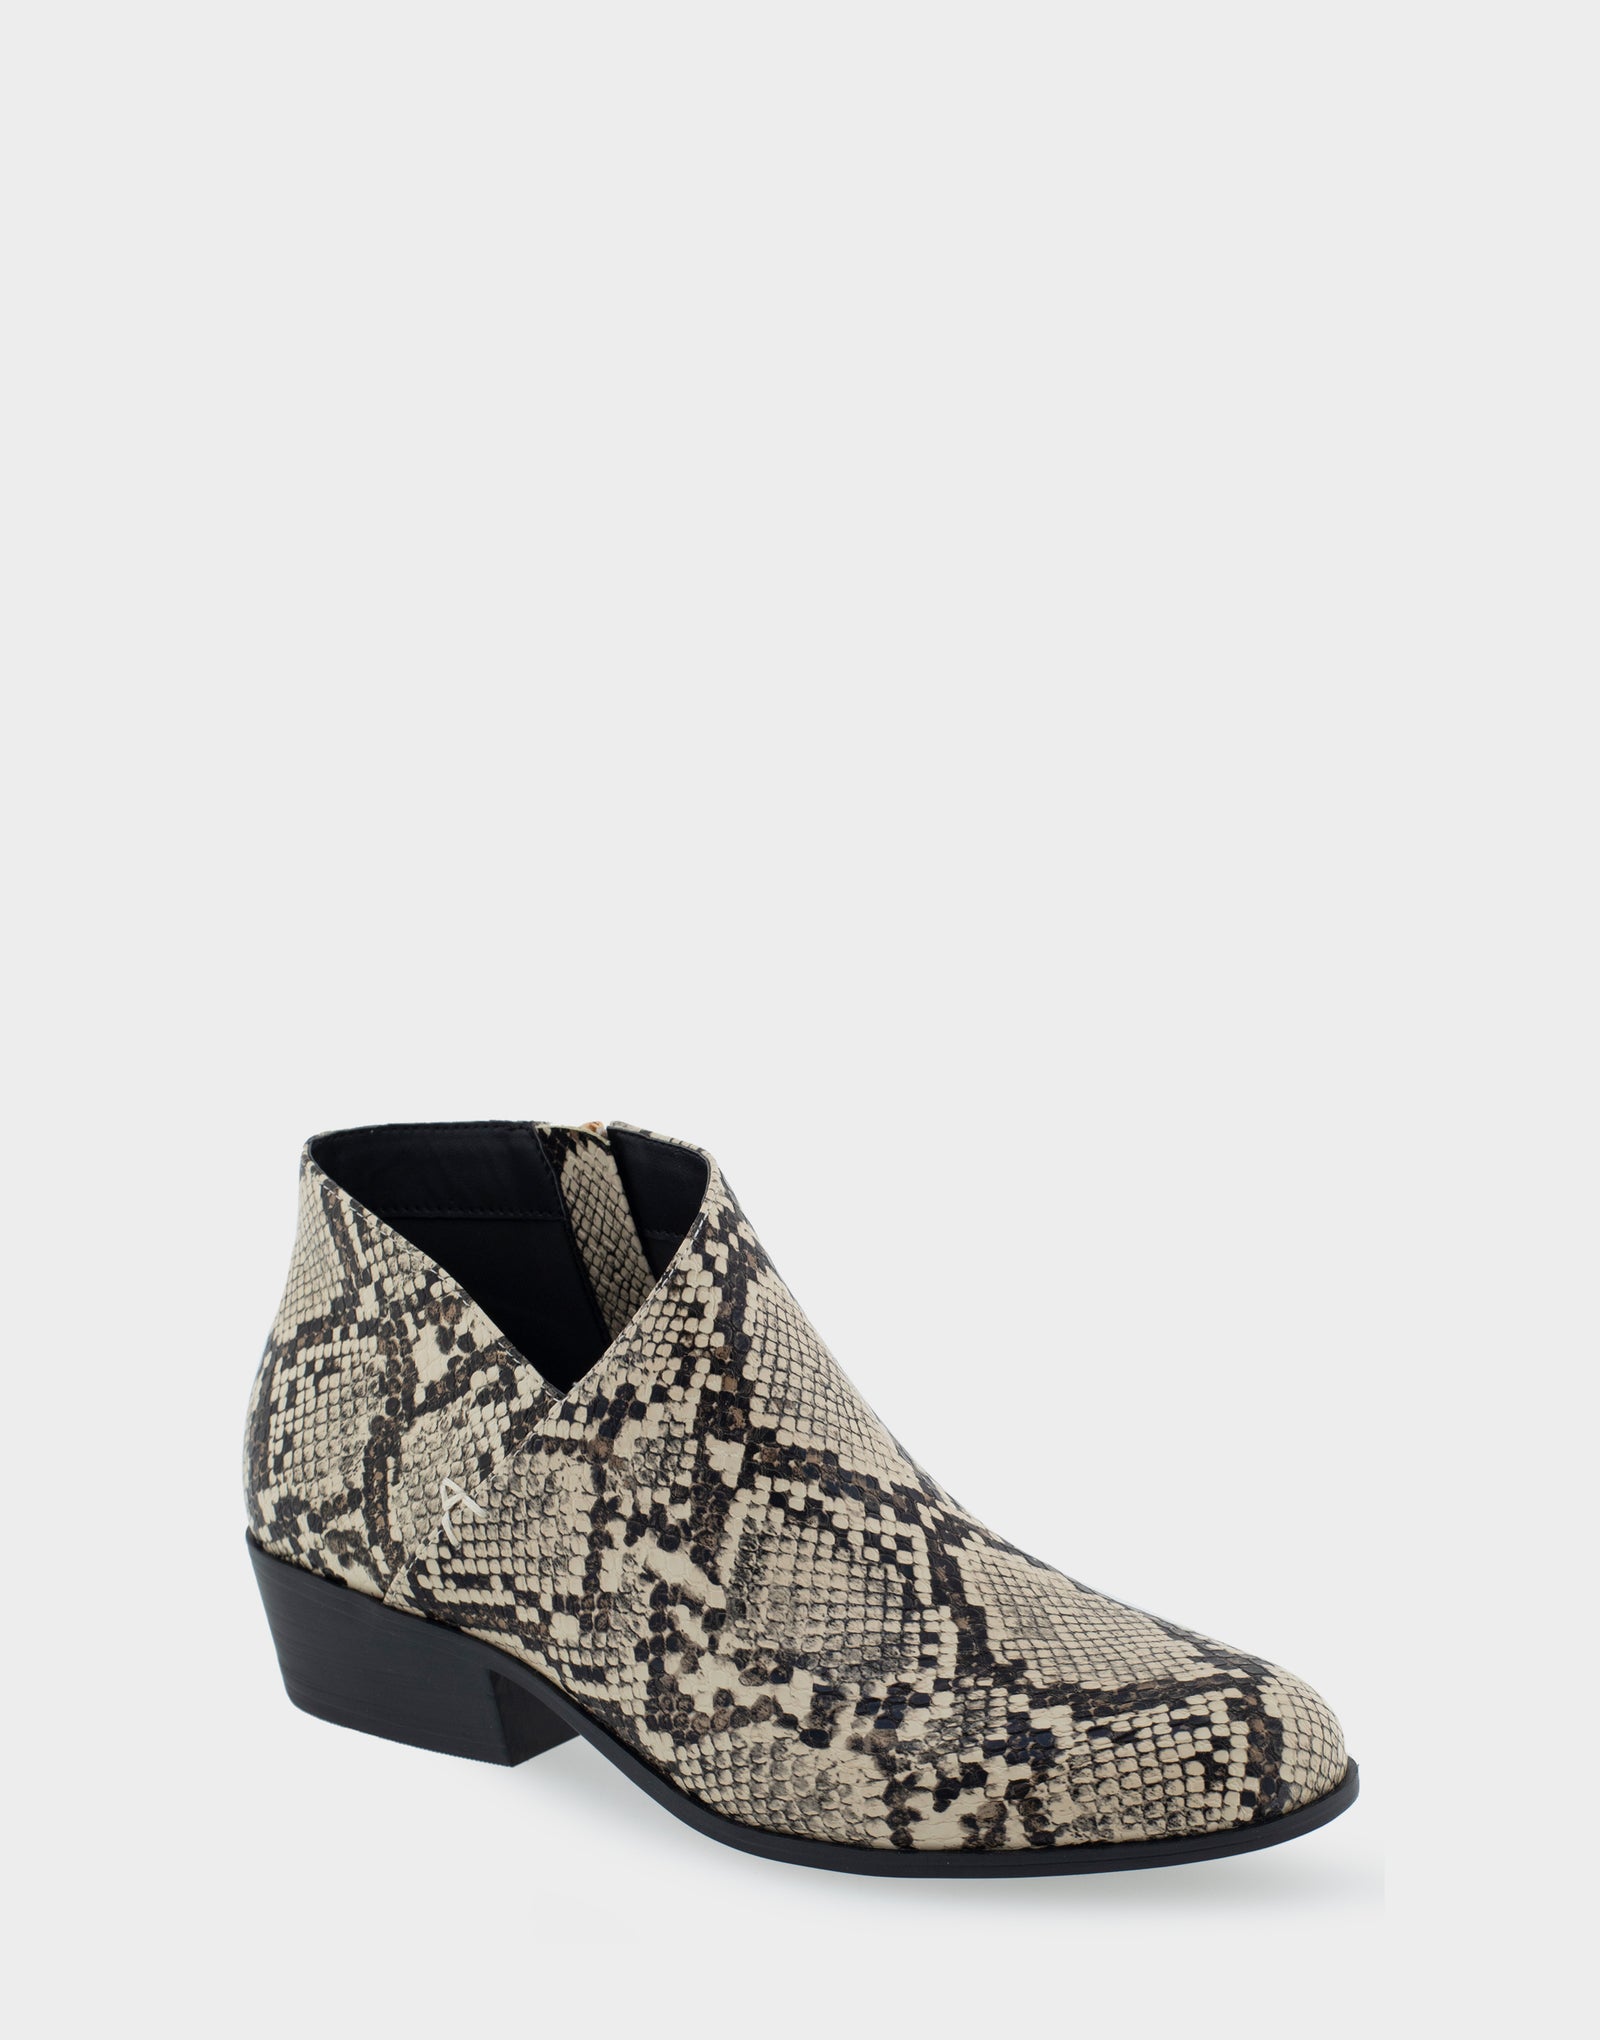 Women's Ankle Boot in Snake Print